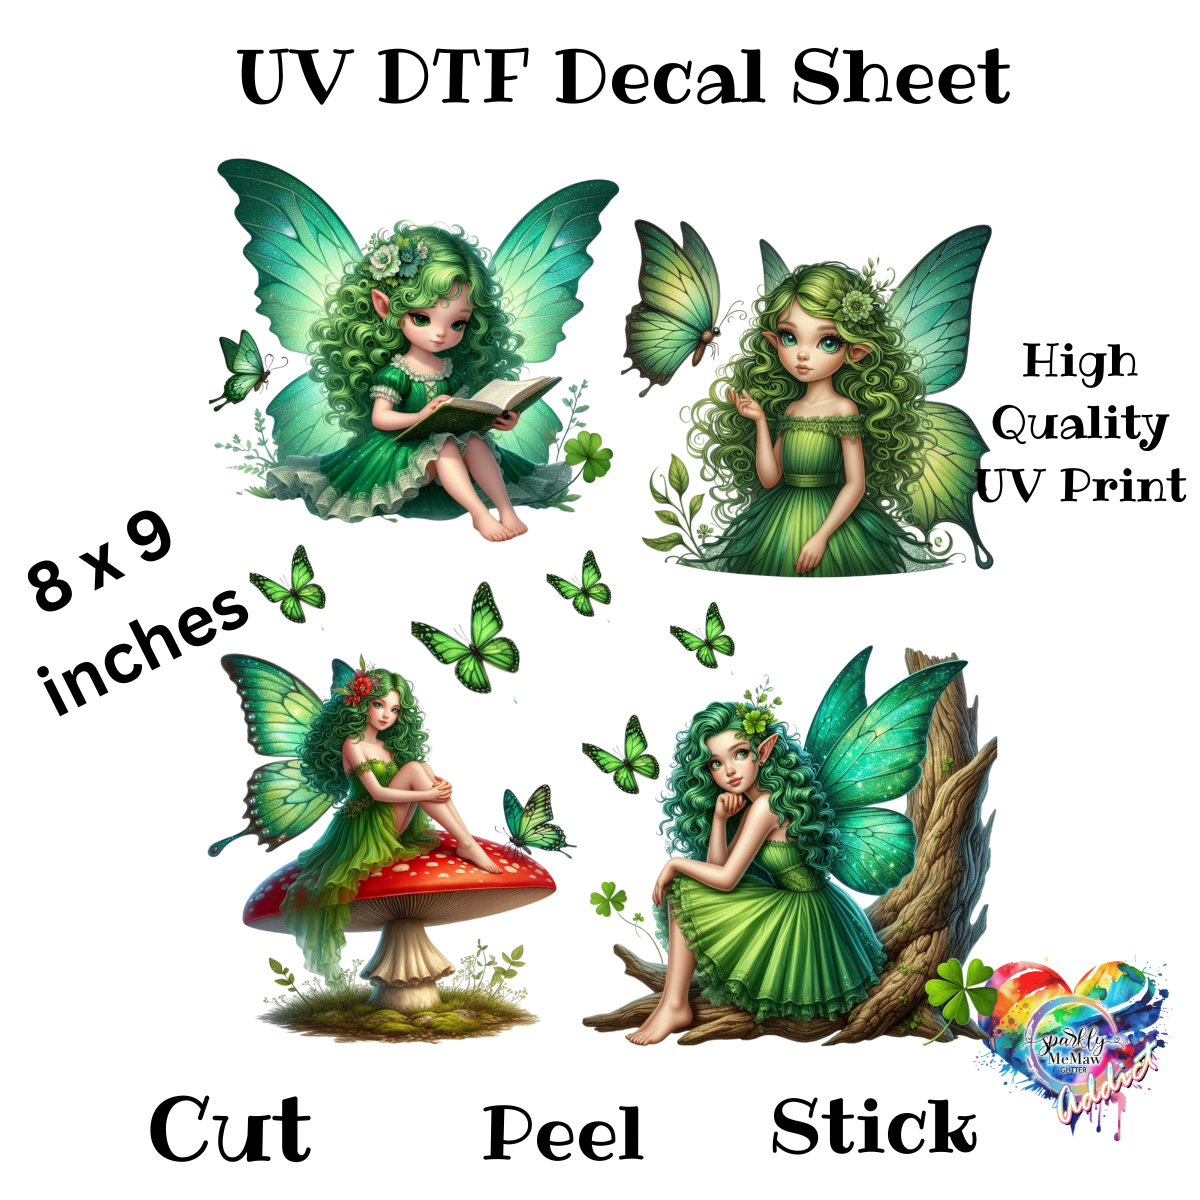 Green Fairy UV DTF Decal Sheet